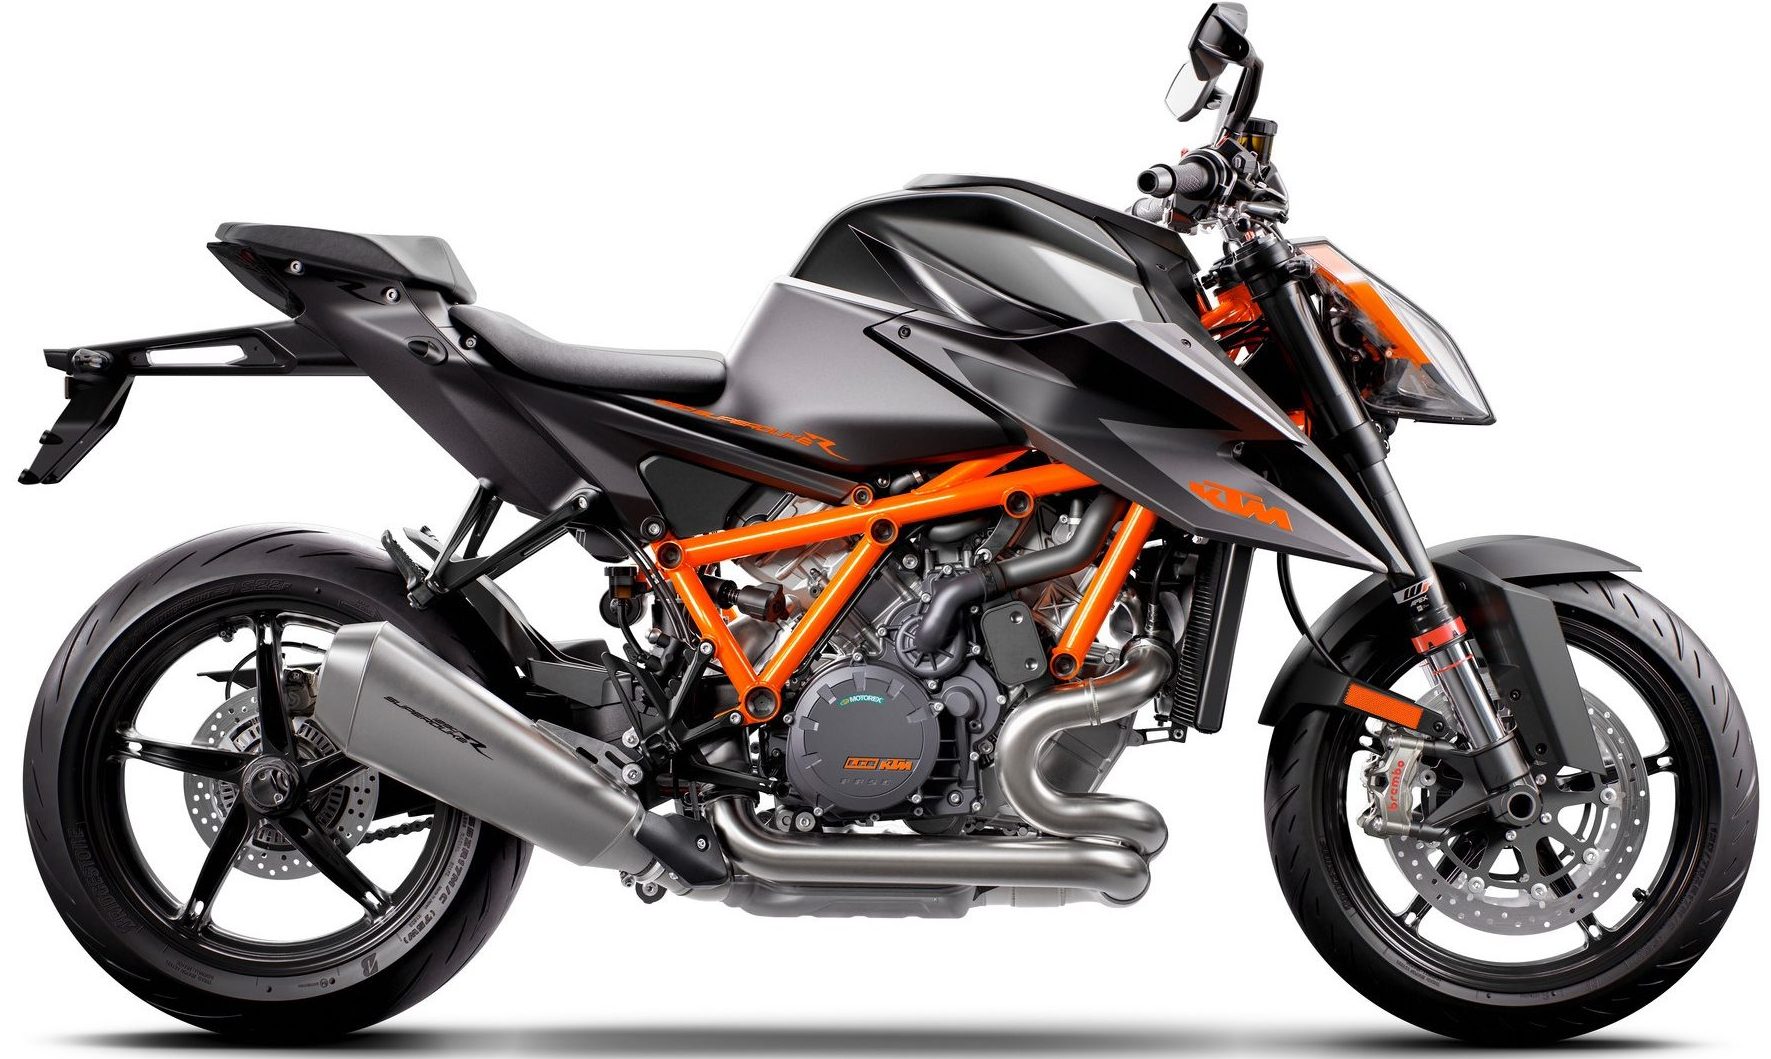 KTM to Officially Showcase the 1290 Super Duke R in India Soon - close-up